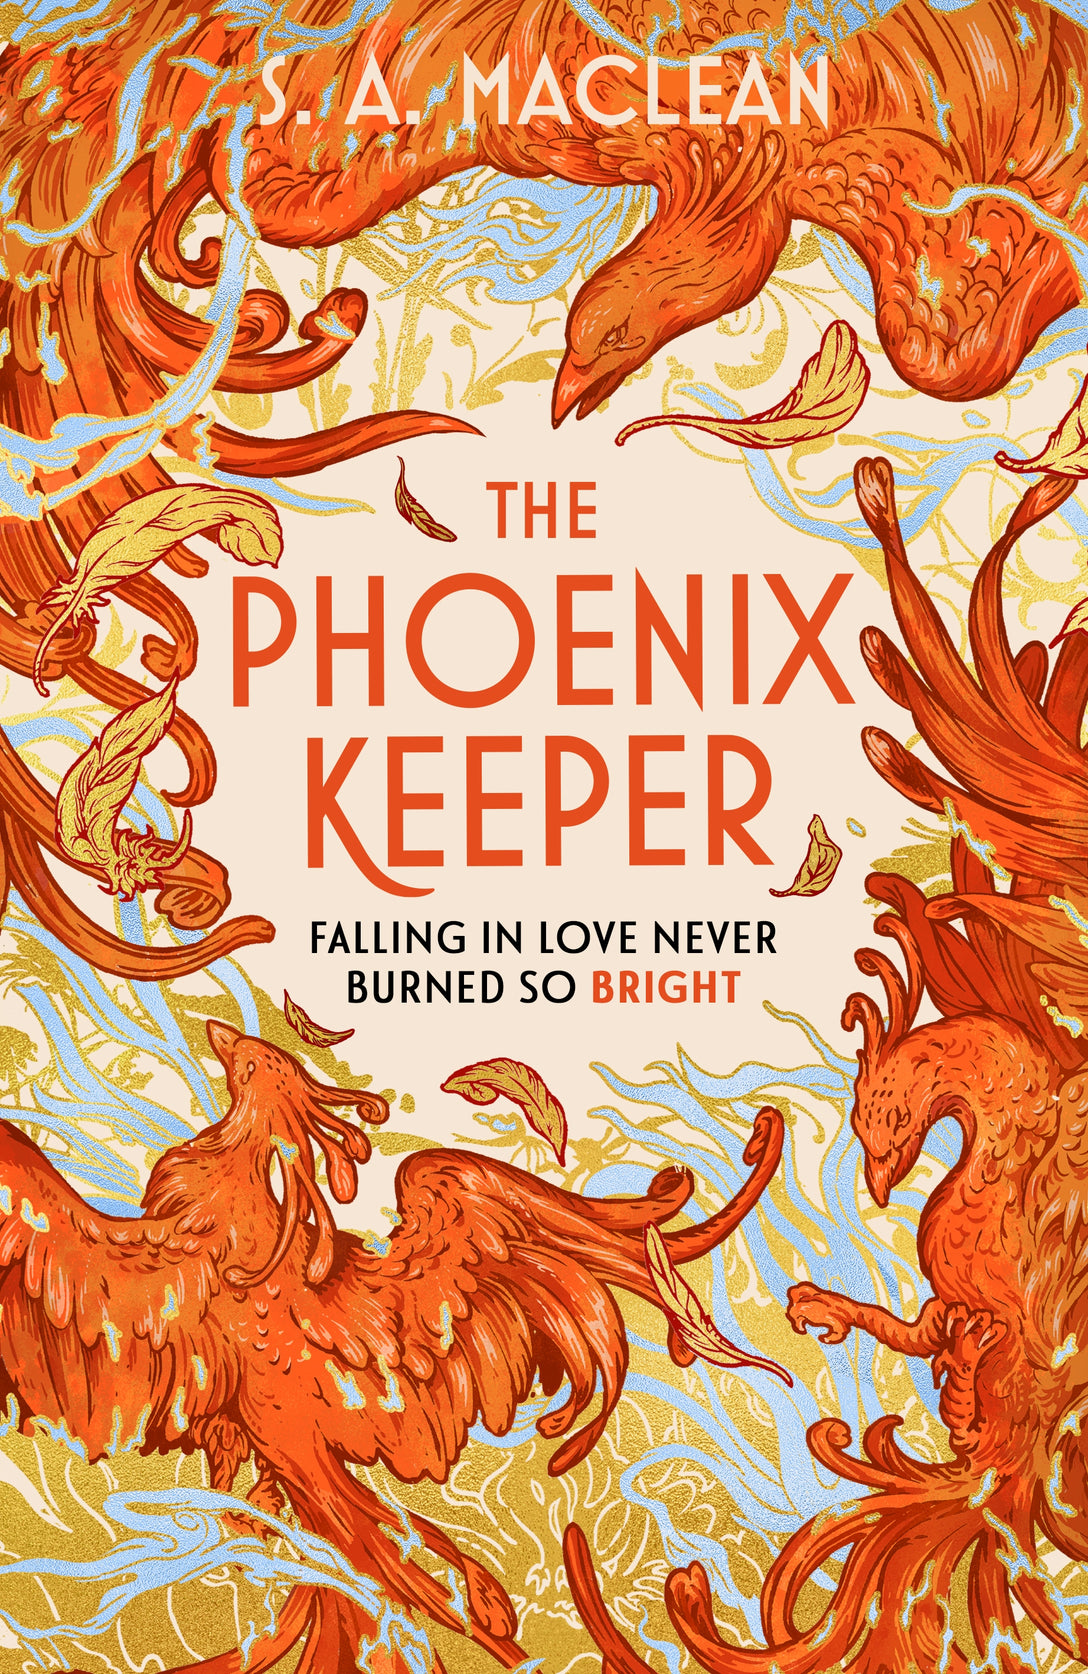 The Phoenix Keeper by S. A. MacLean